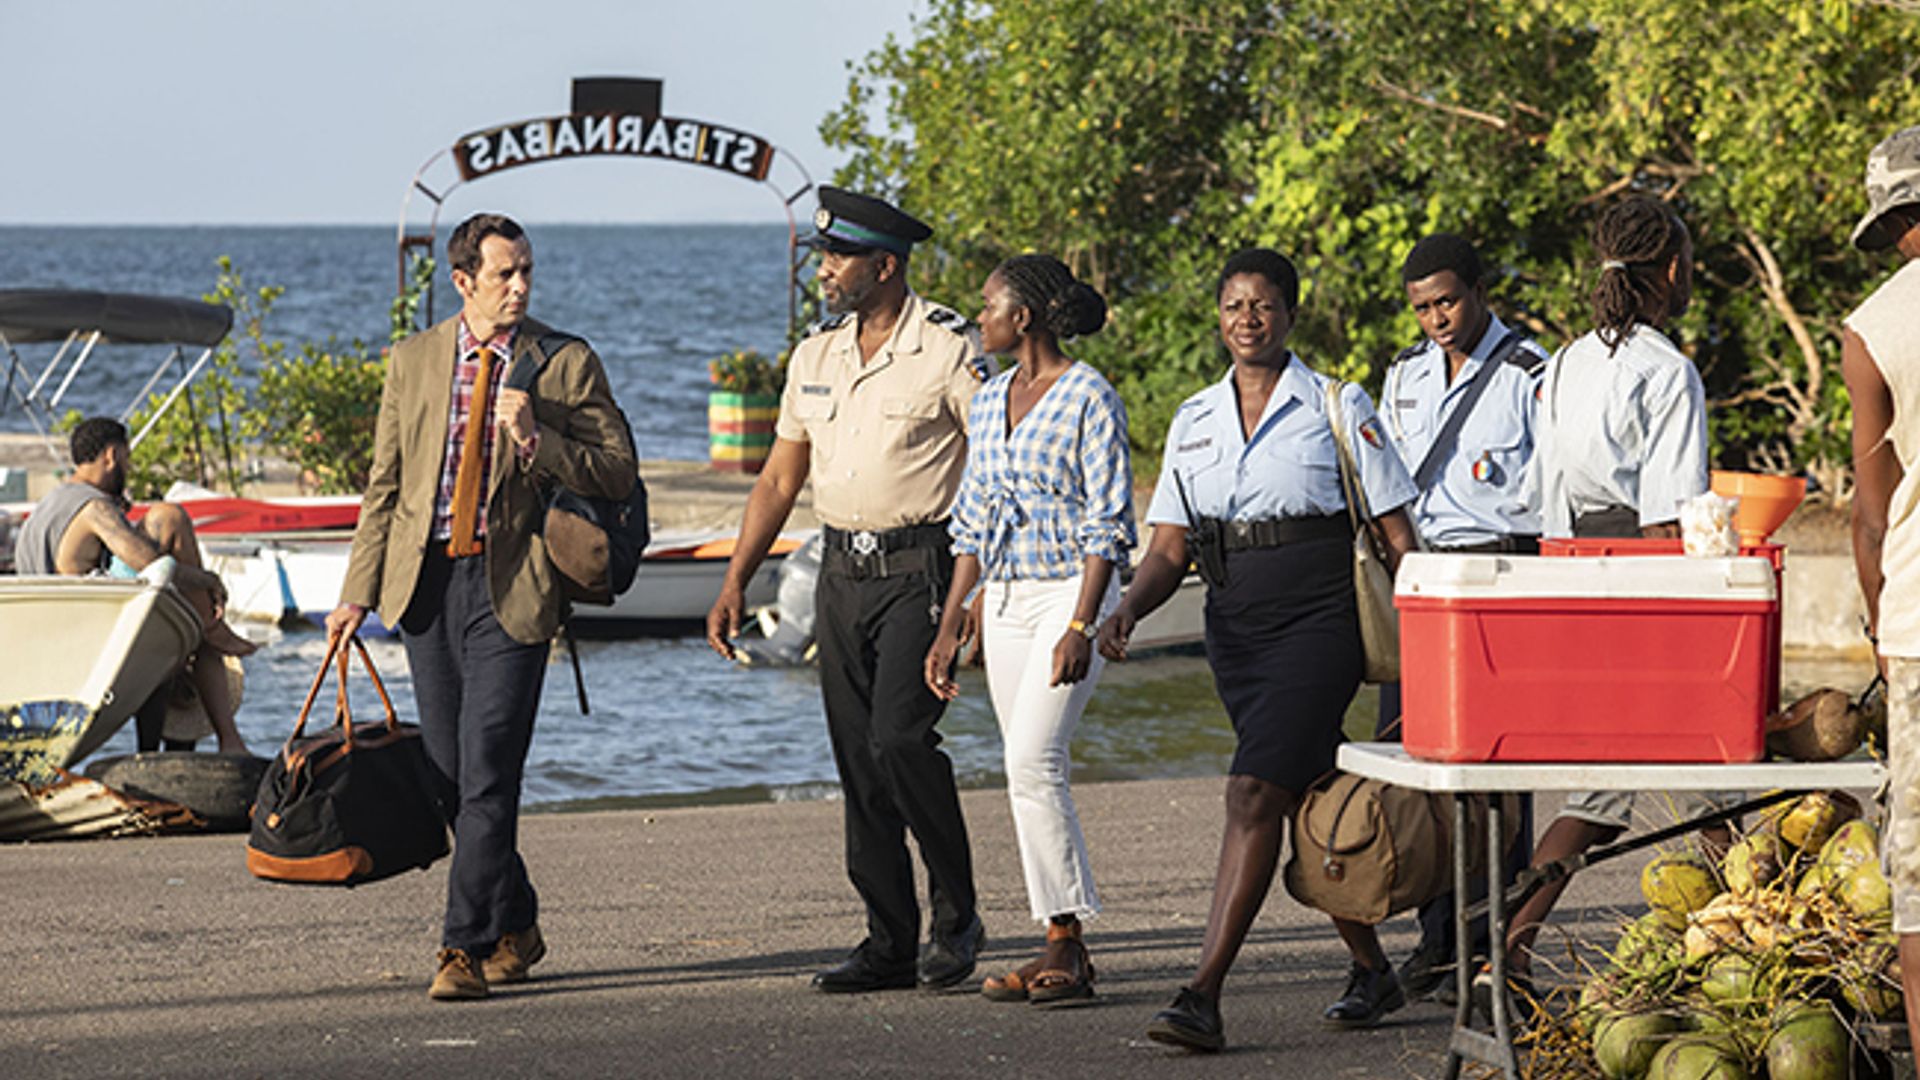 death in paradise series 12 st barnabus